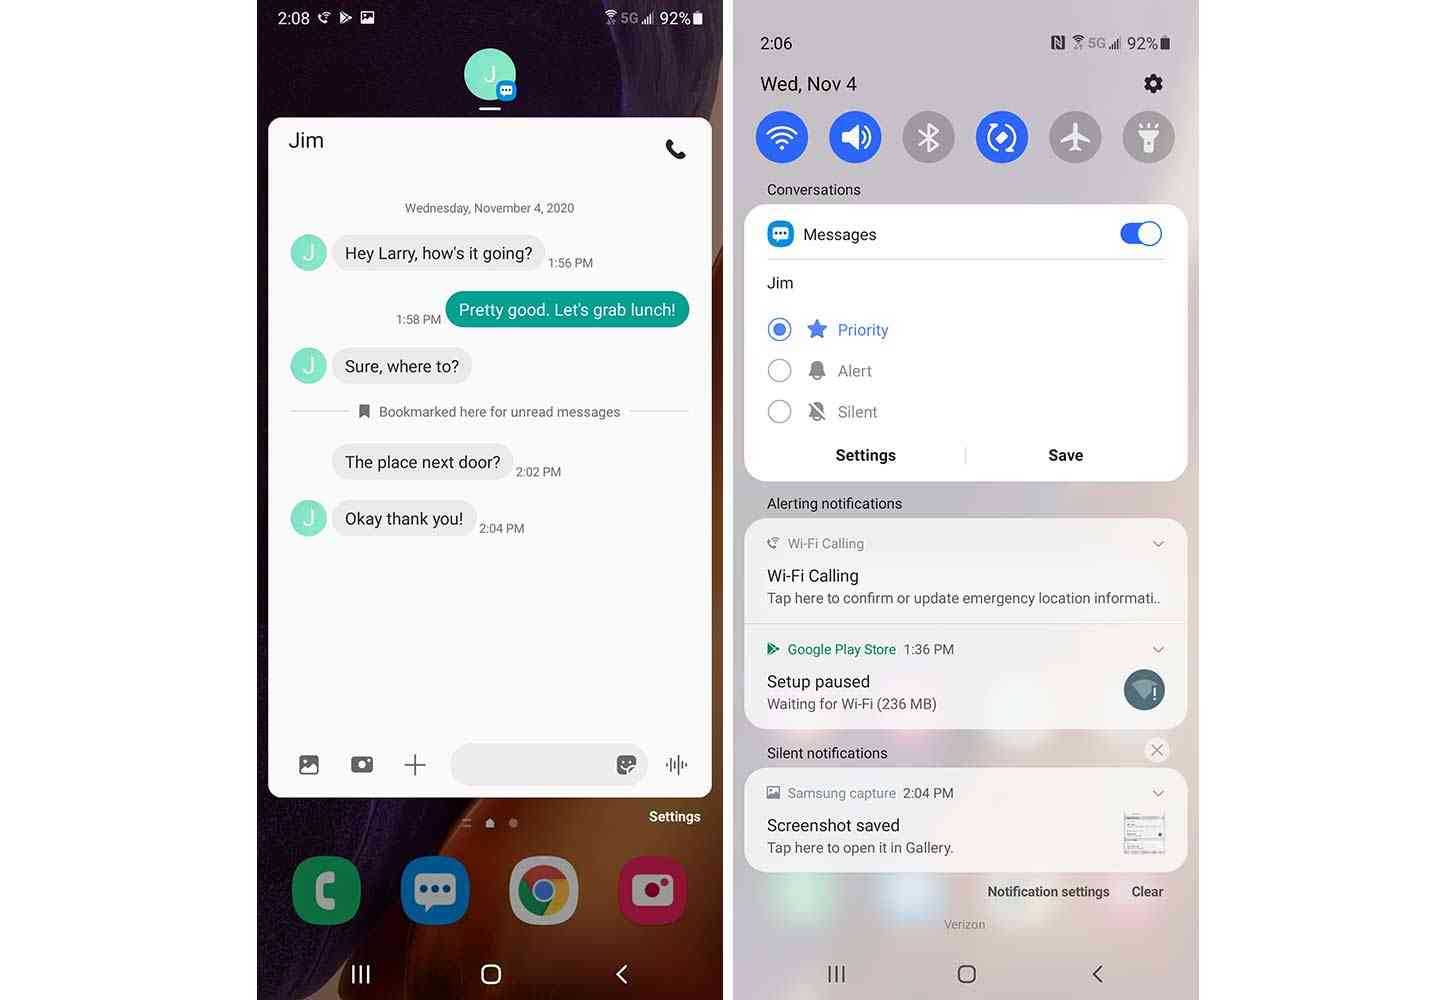 Samsung One UI 3.0 with Android 11